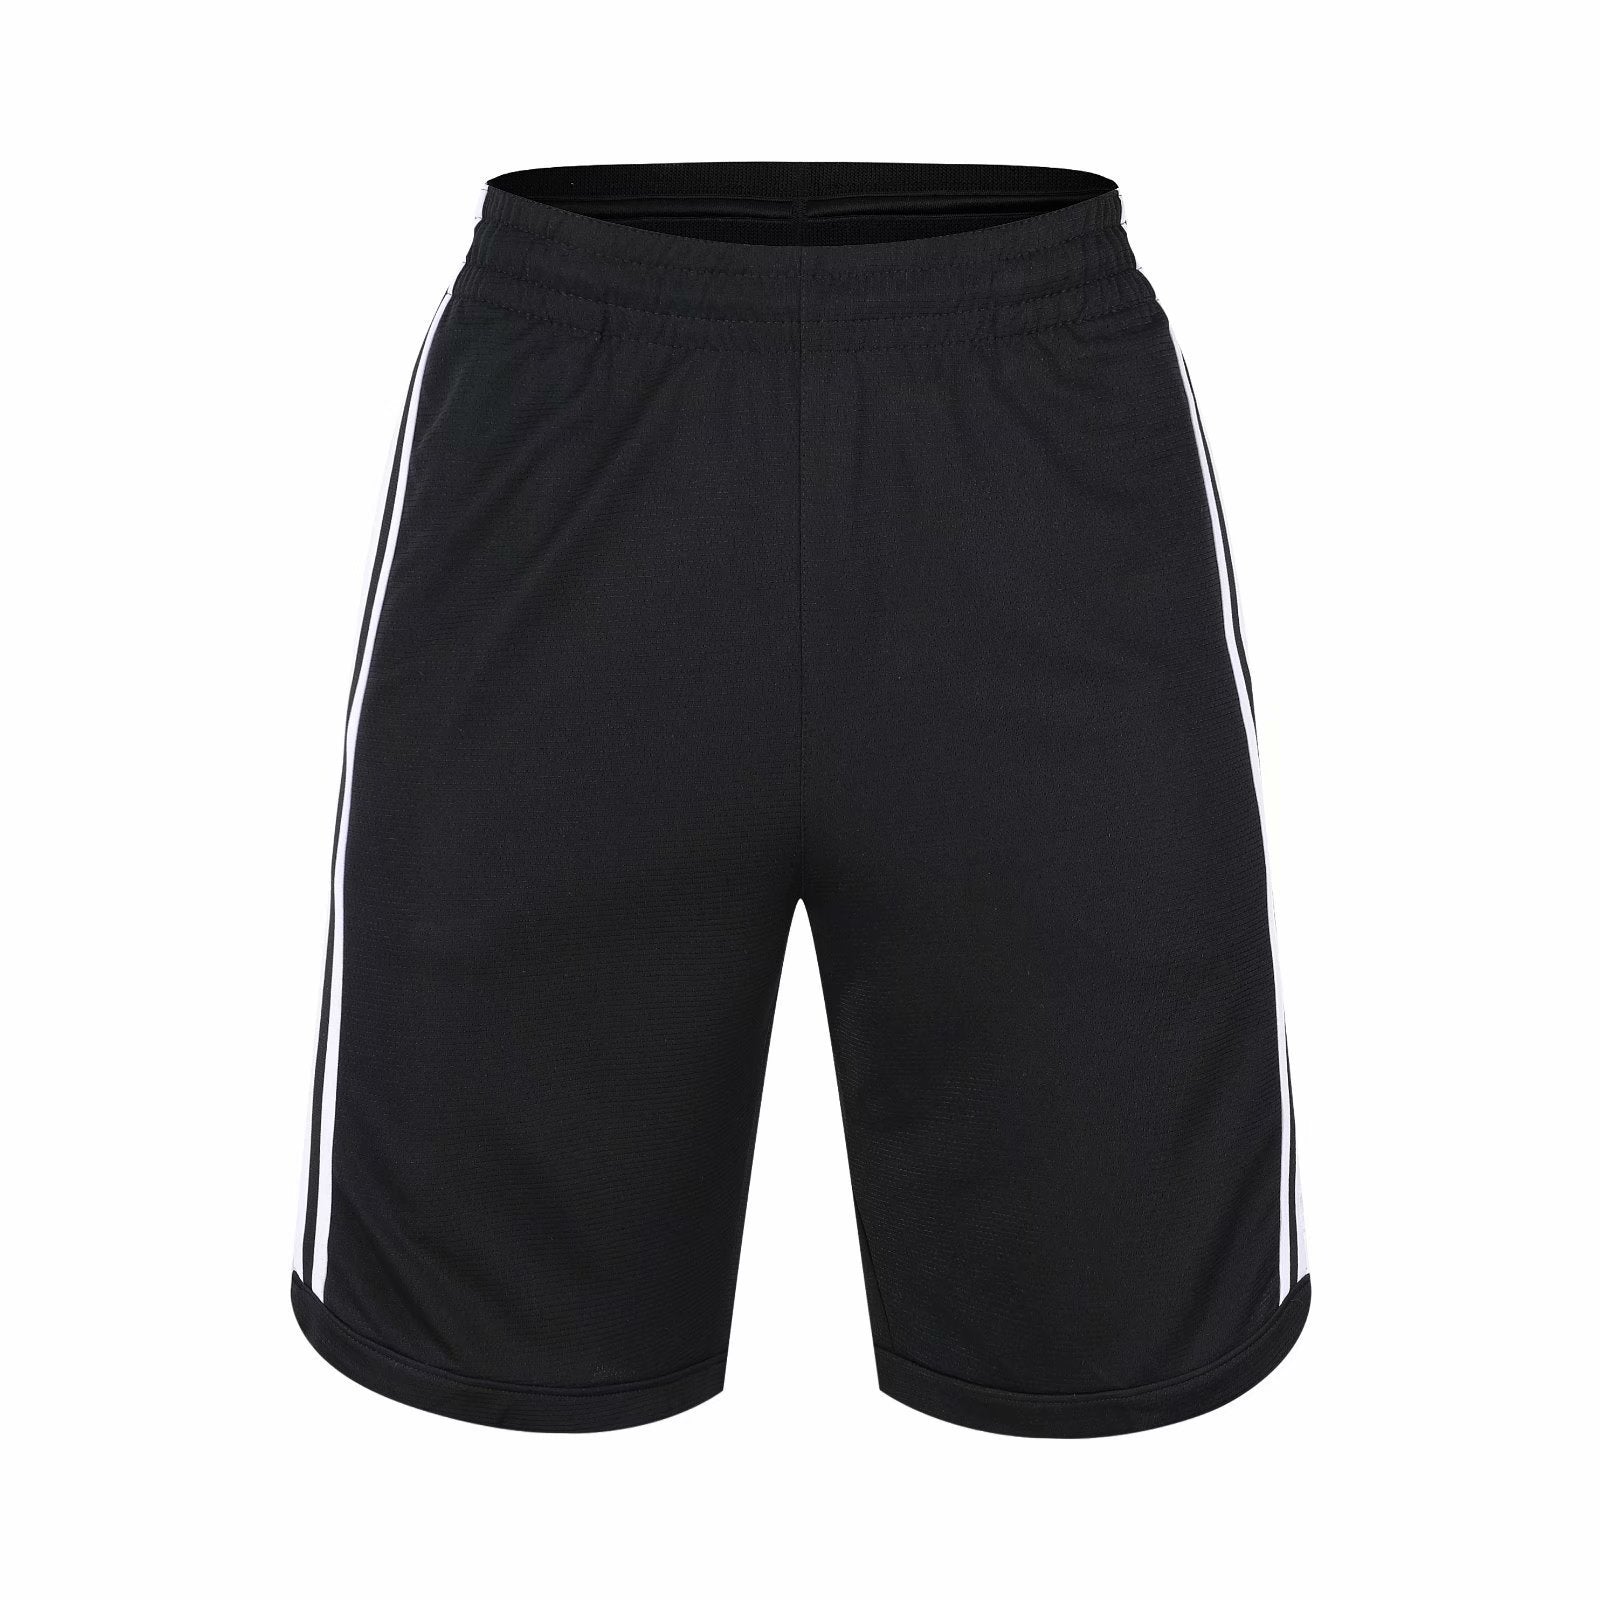 Basketball Shorts DLS2P0054 - applecome